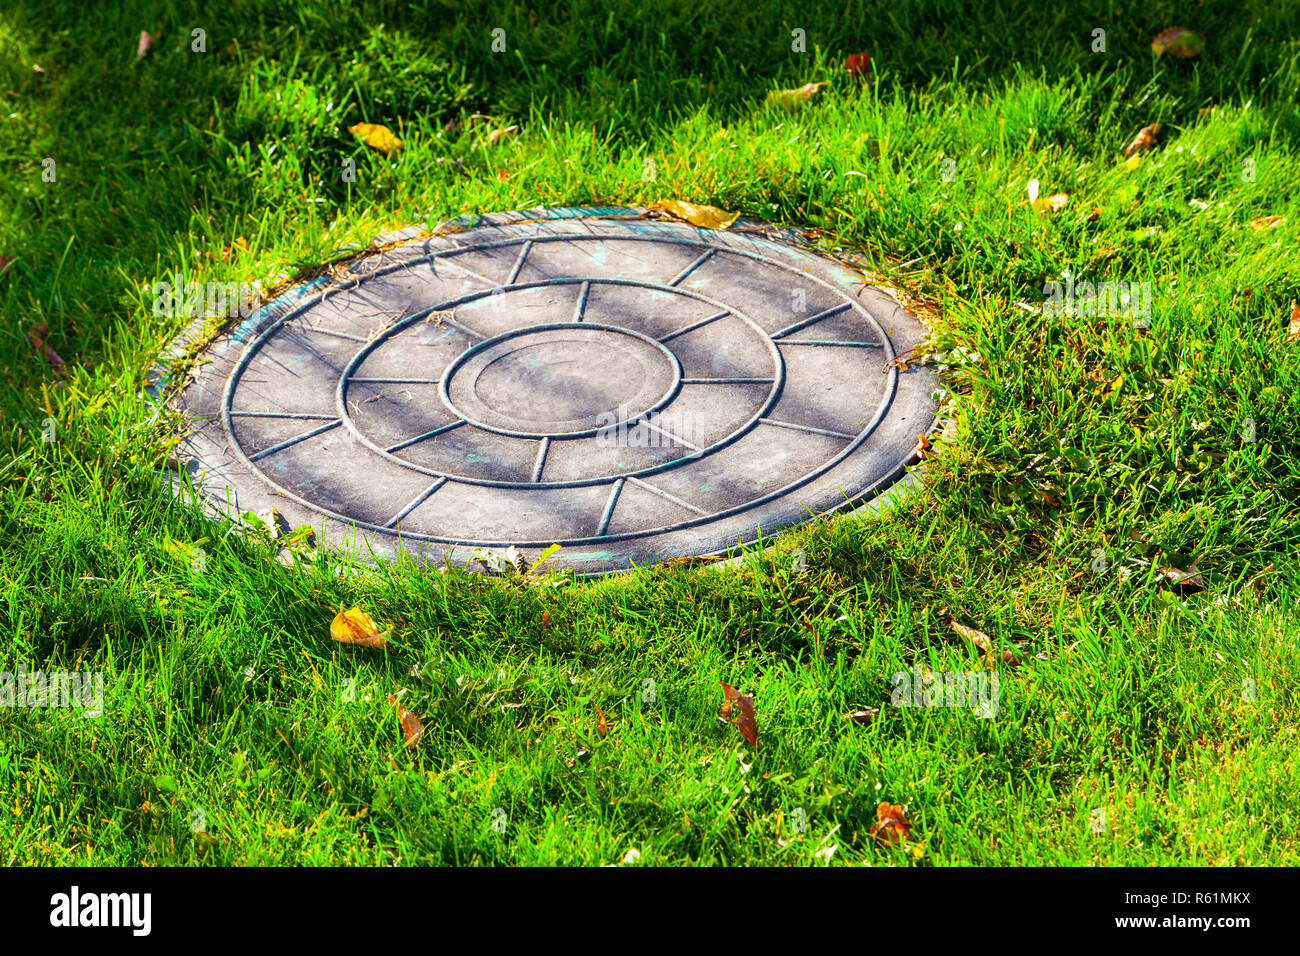 Sewer manhole on a green lawn. Stock Photo